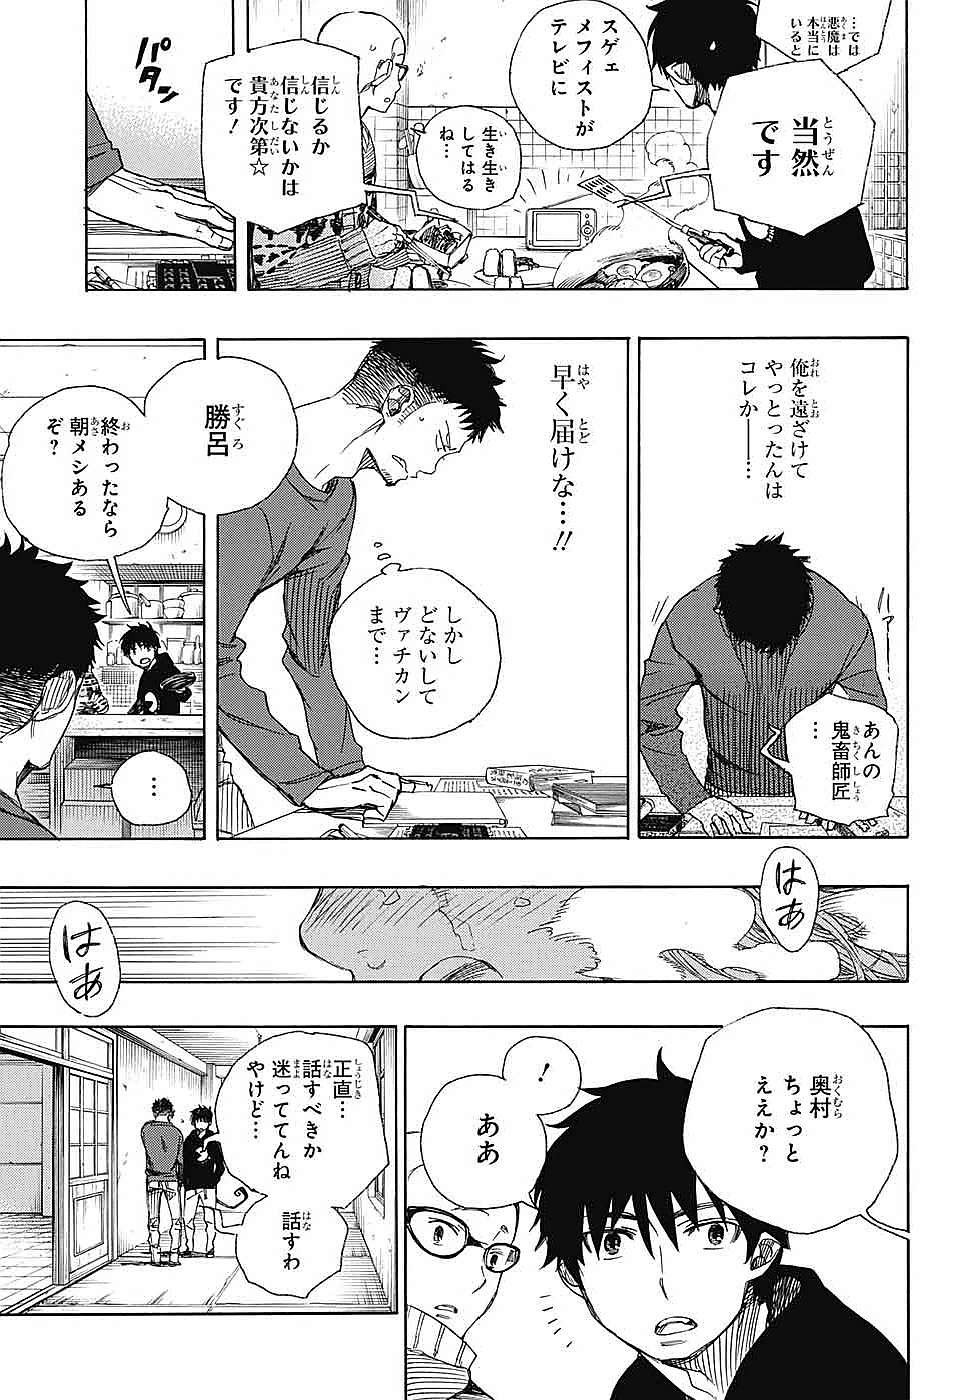 Ao no Exorcist - Chapter 93 - Page 33